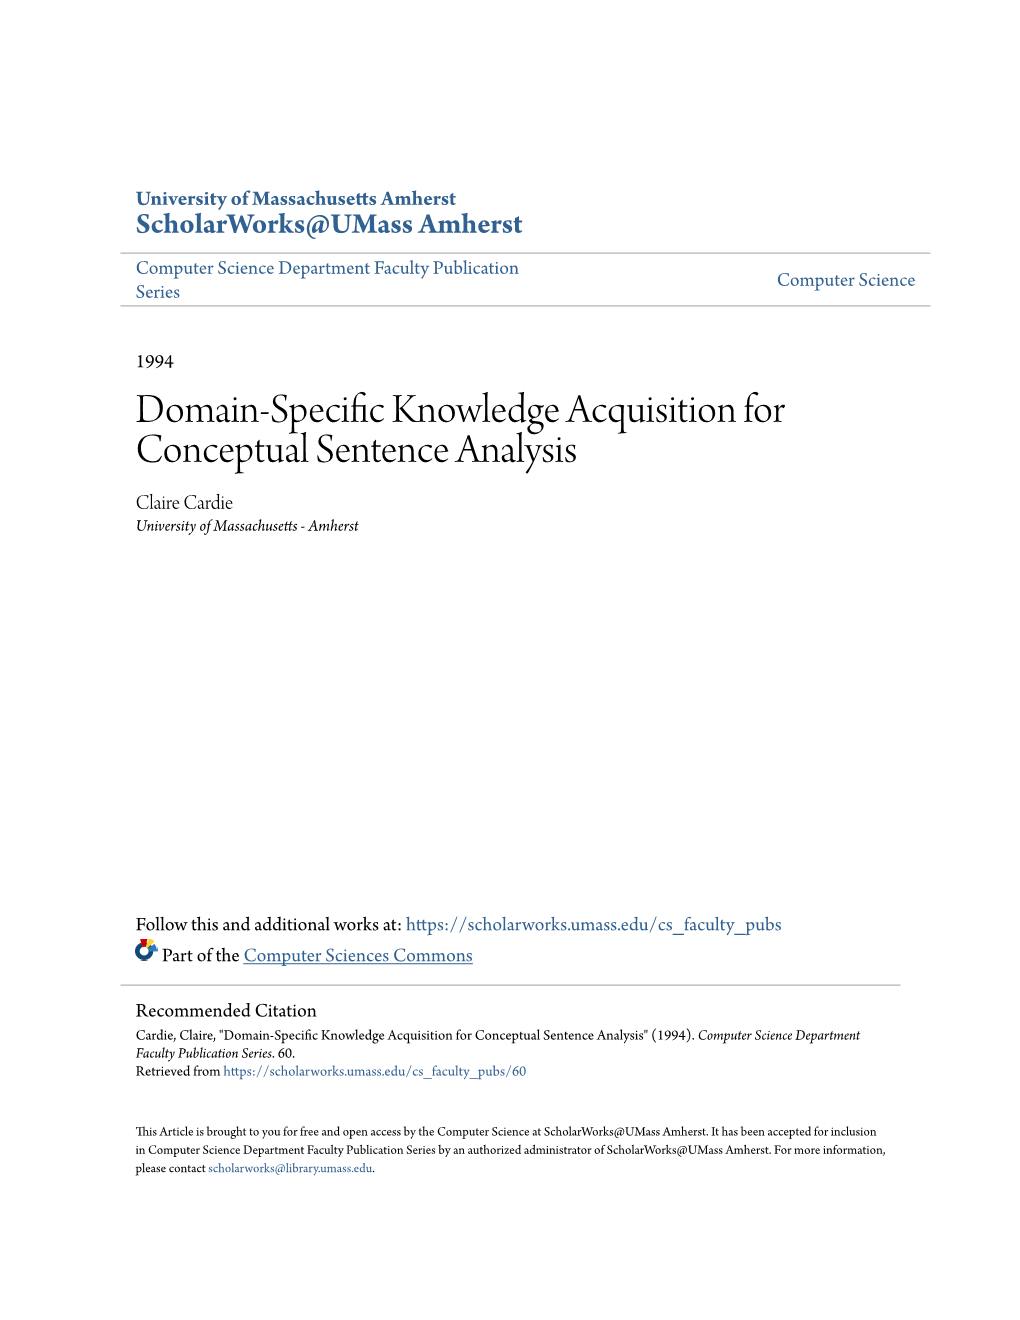 Domain-Specific Knowledge Acquisition for Conceptual Sentence Analysis Claire Cardie University of Massachusetts - Amherst